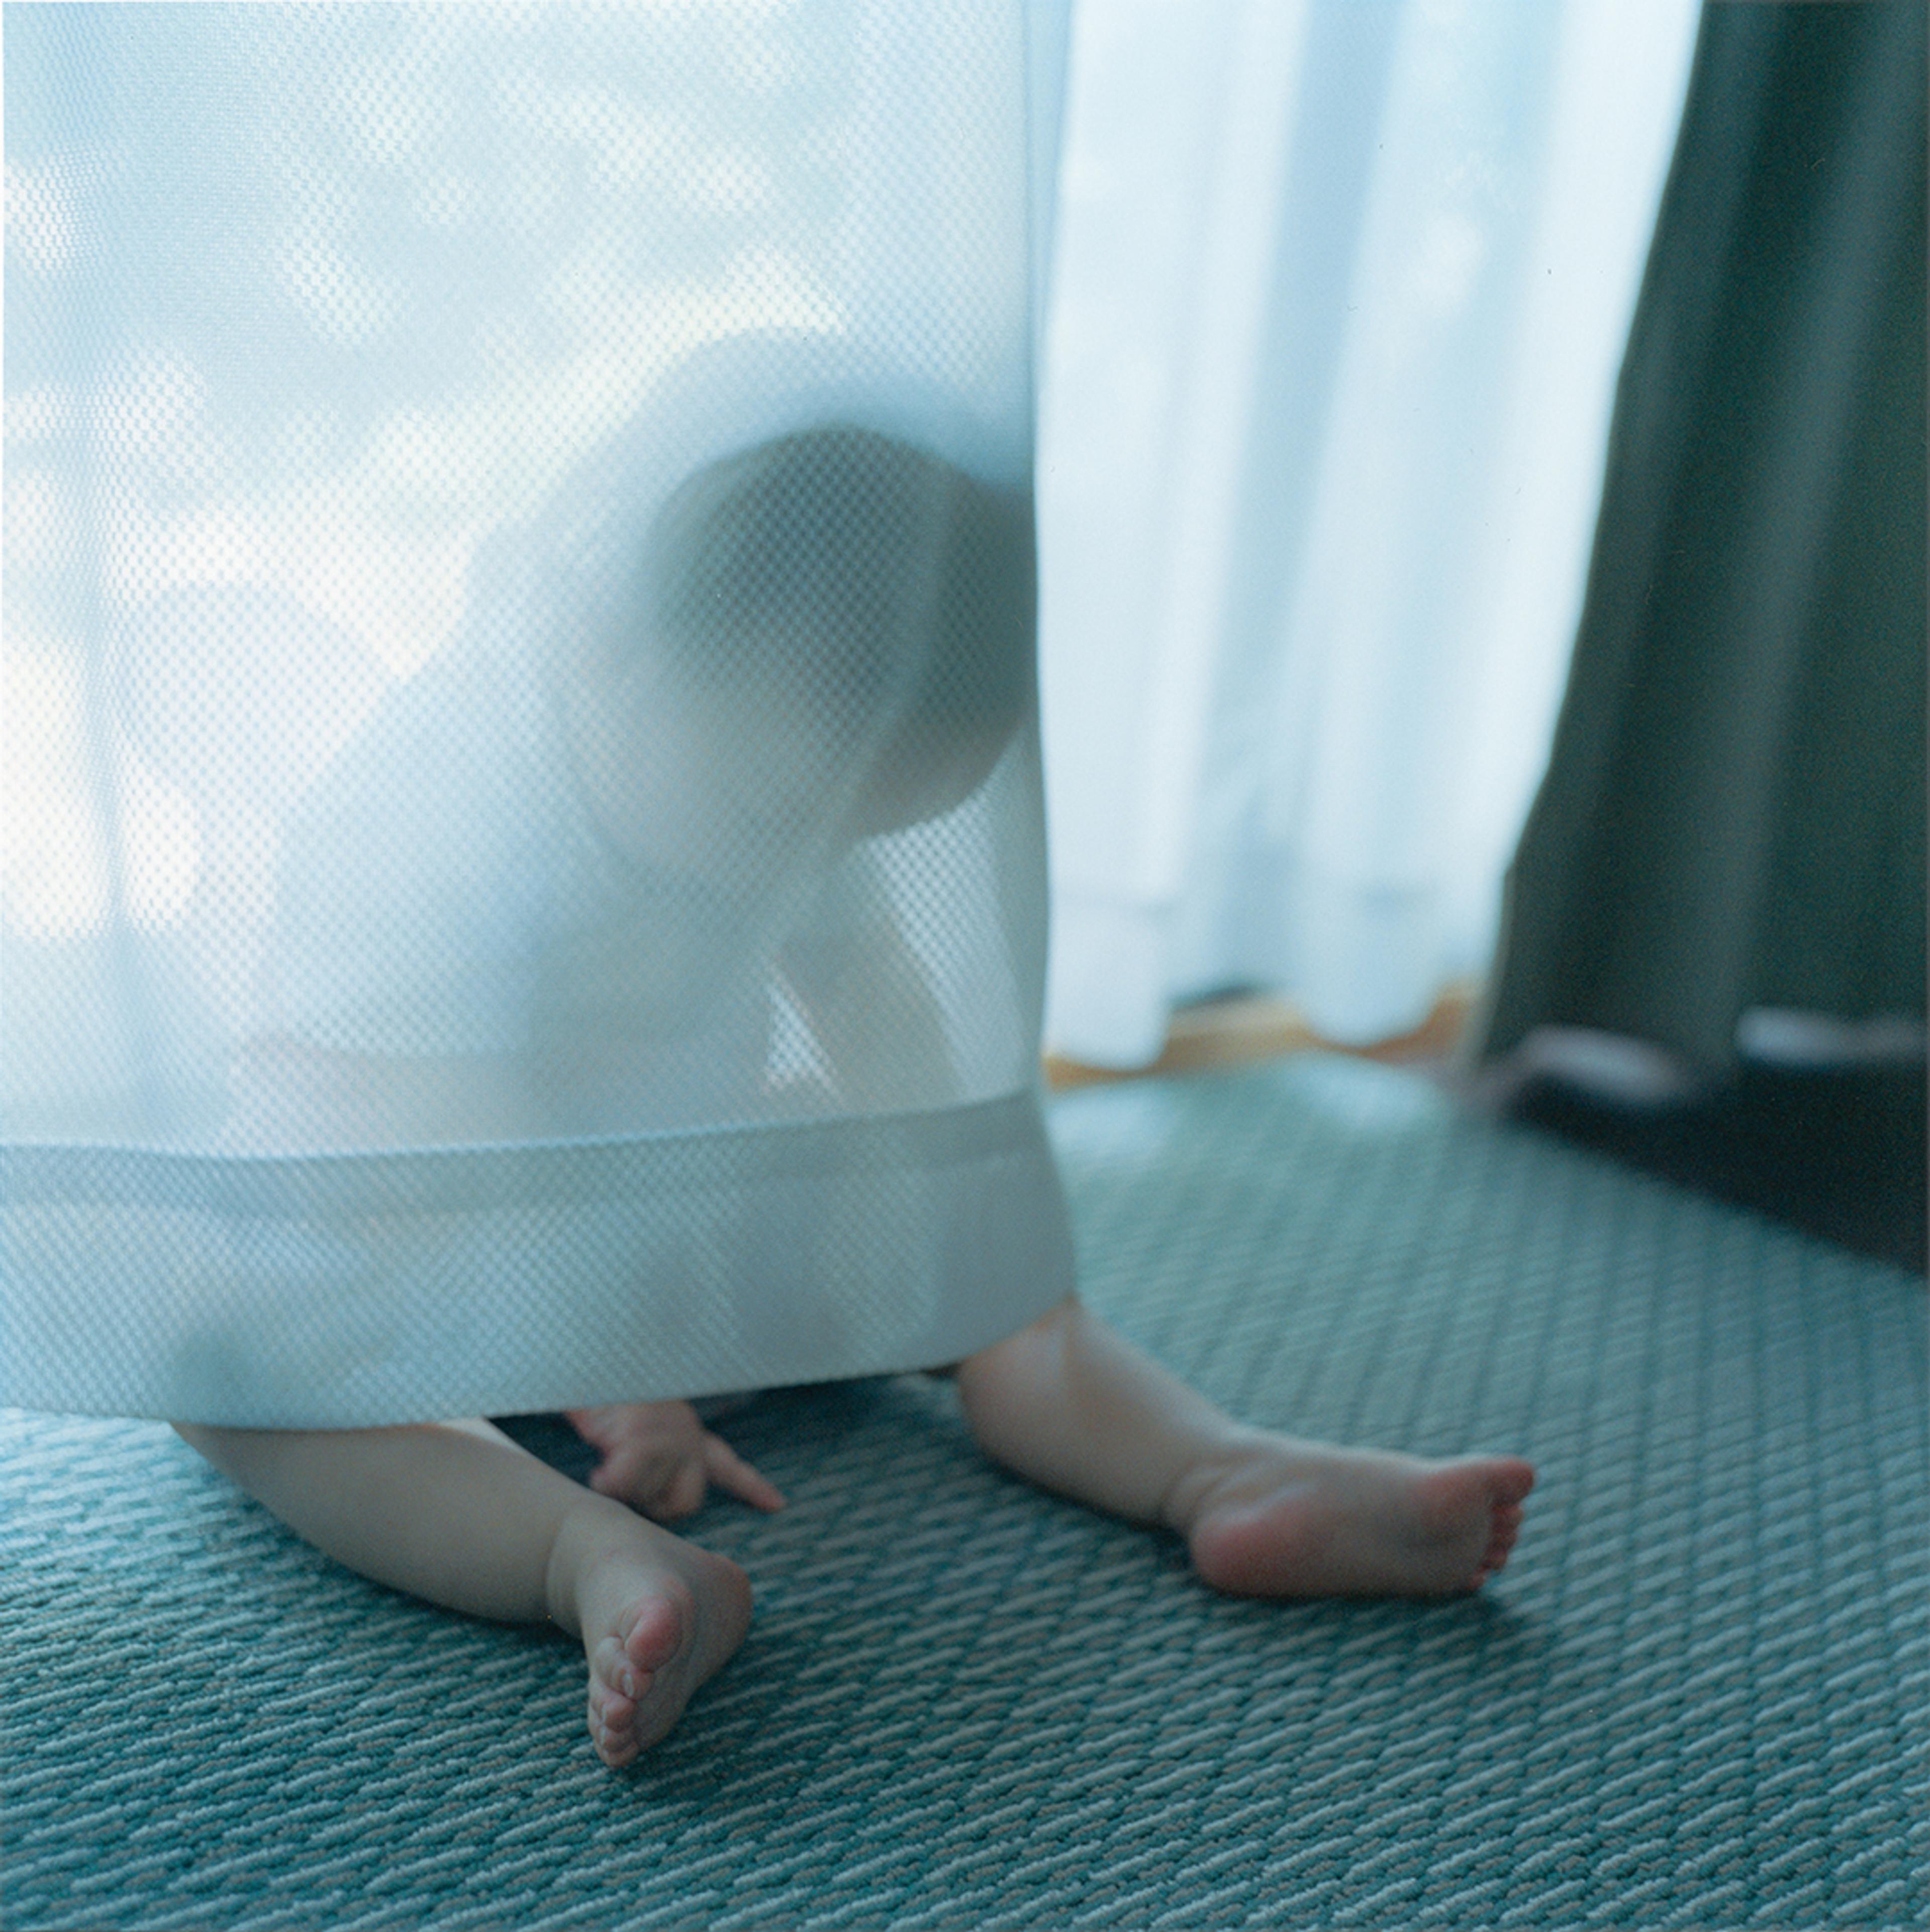 Untitled, 2012 From the series An interlinking © Rinko Kawauchi, Courtesy of Christophe Guye Galerie